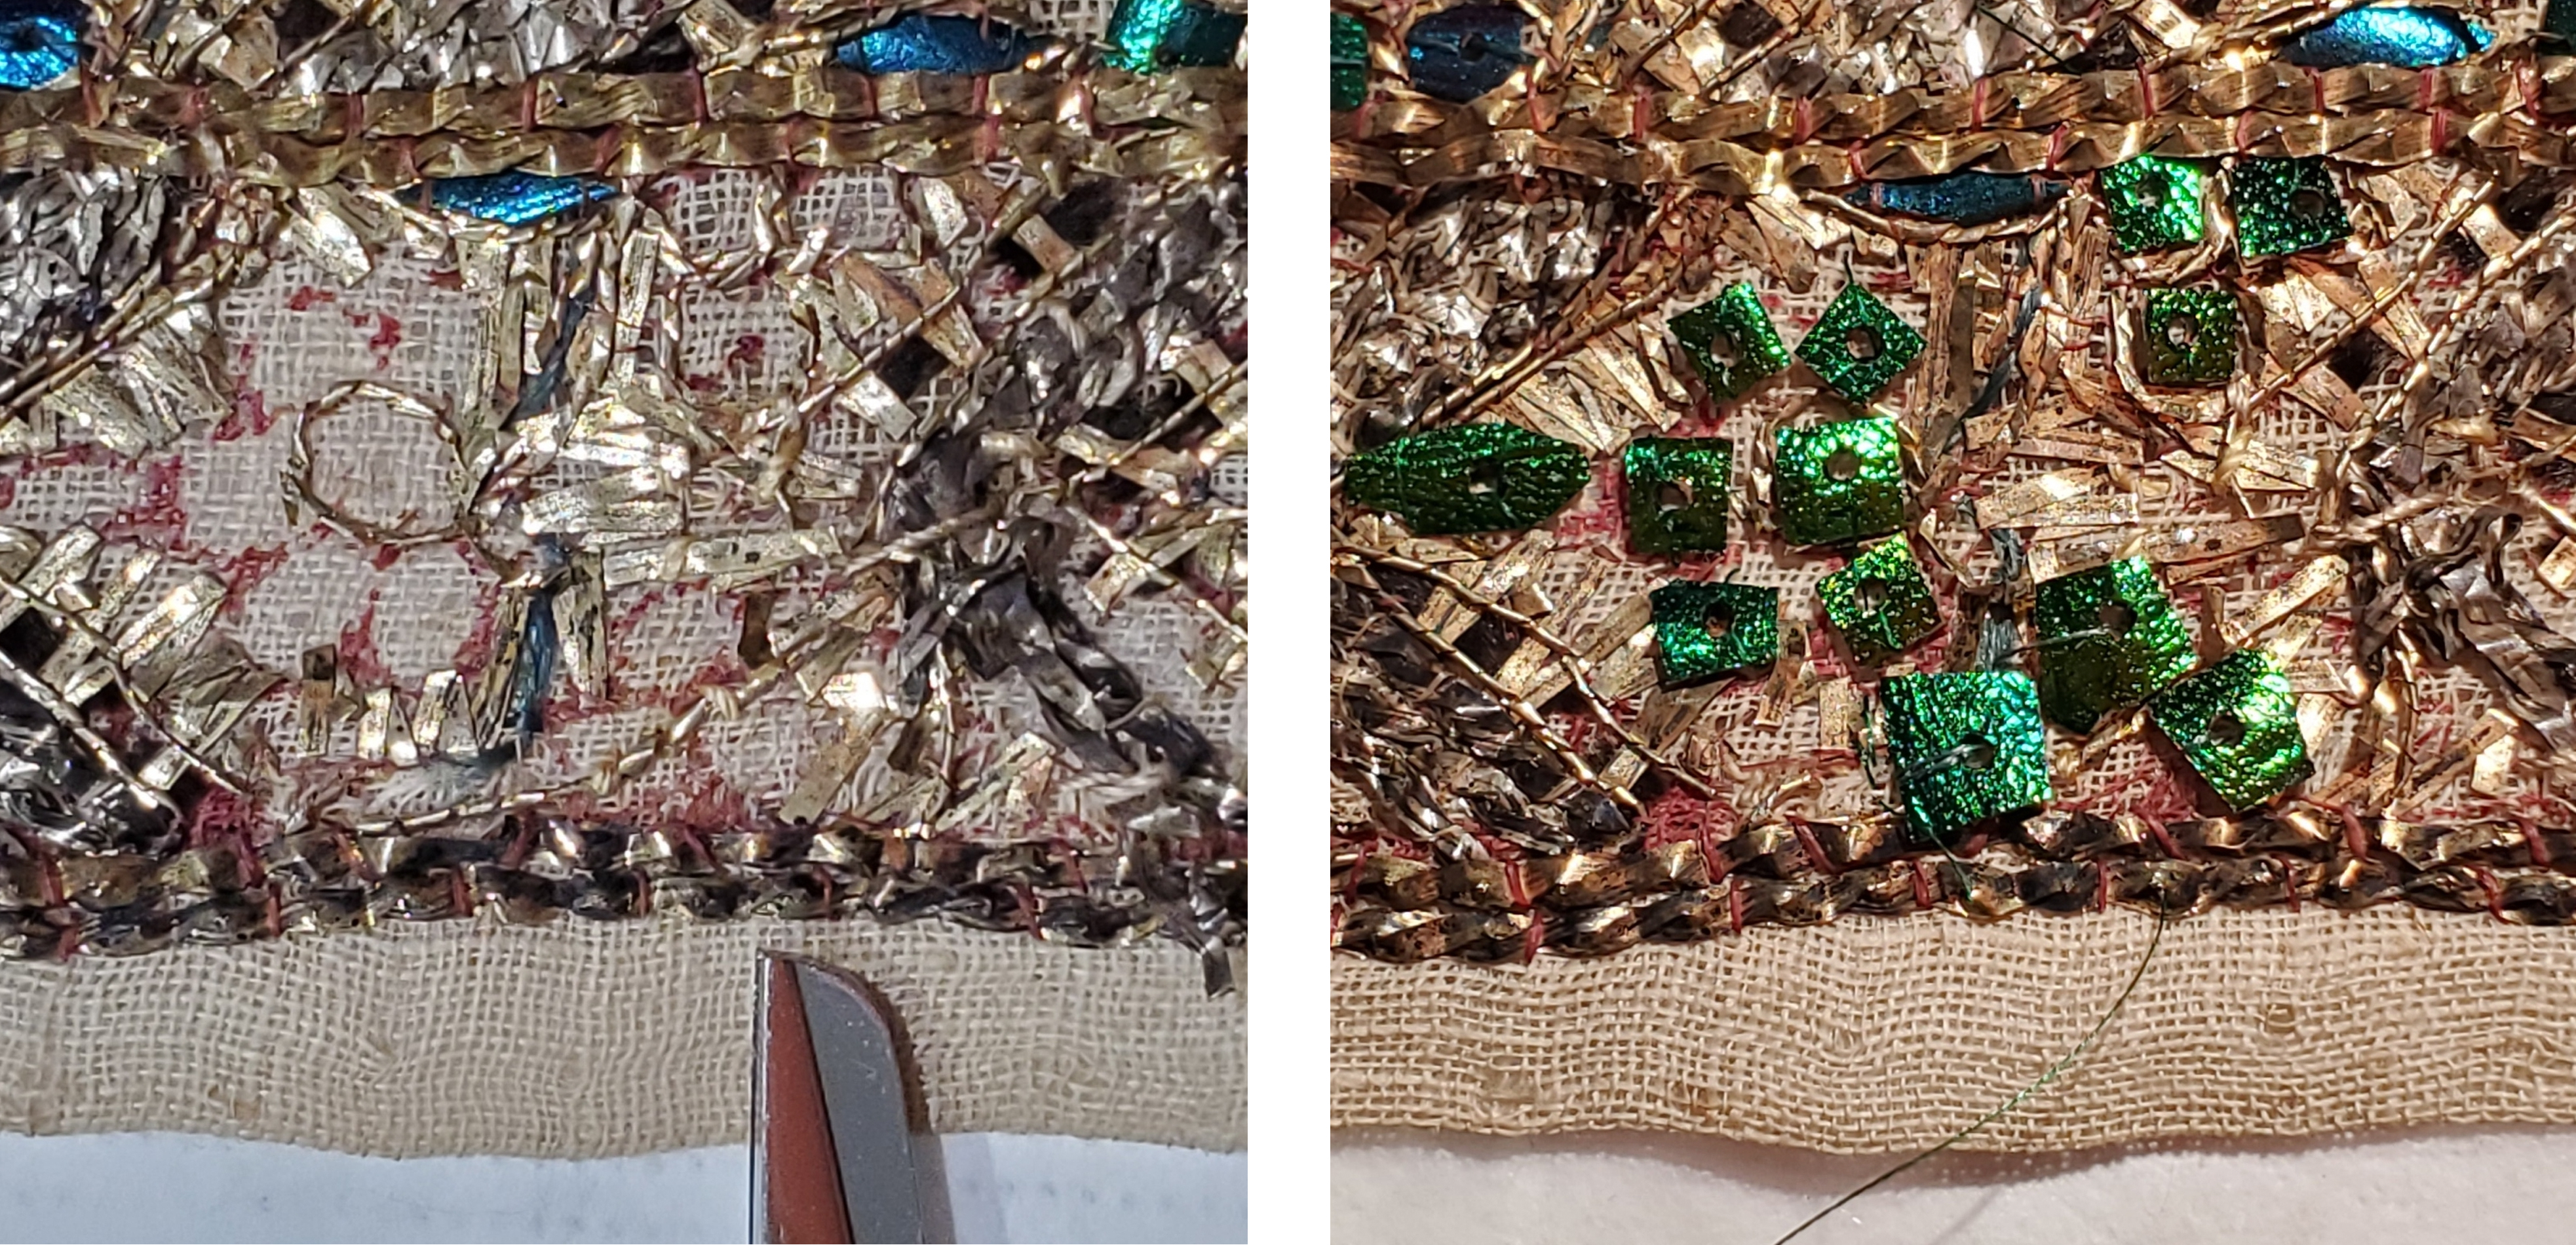 Edge of sash before and after having sequins sewn on